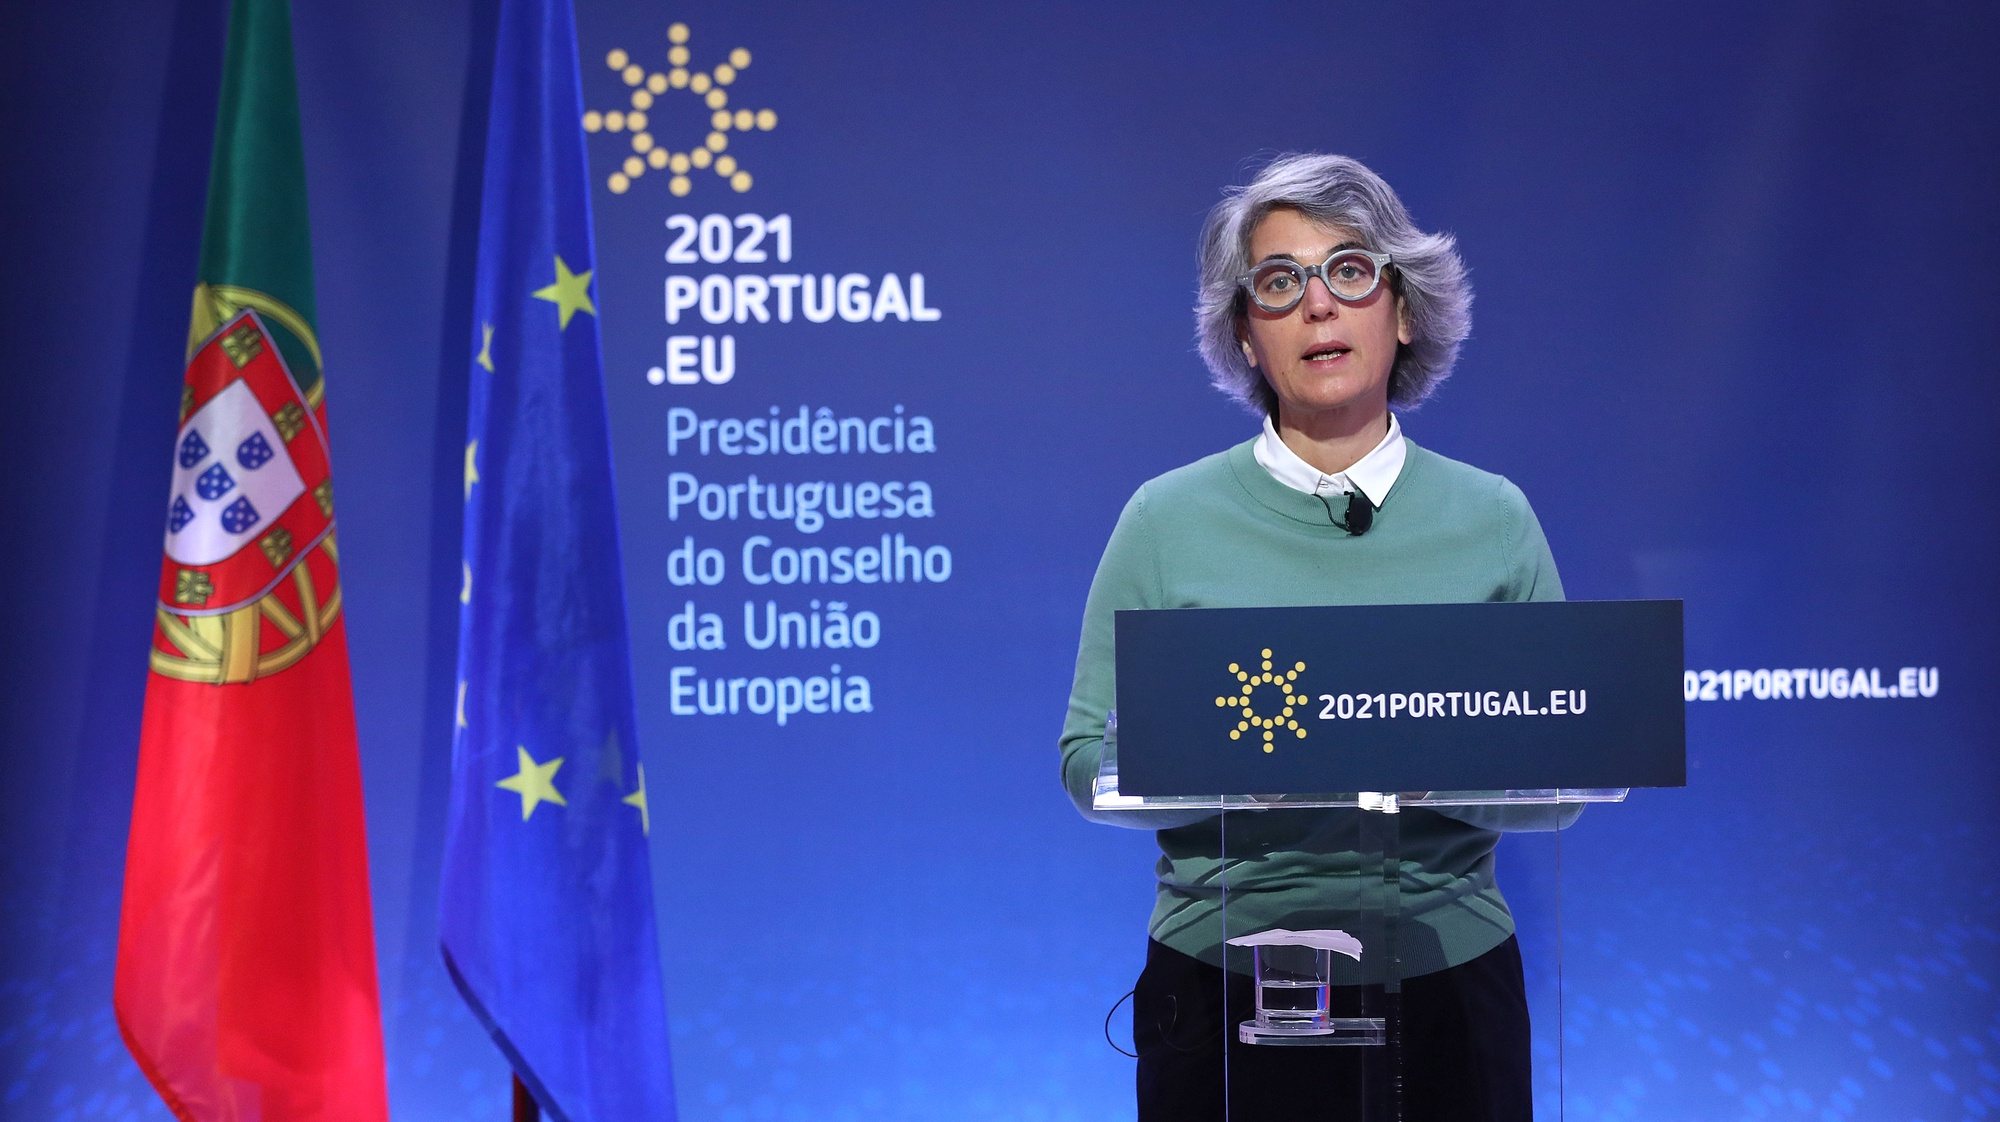 epa09003604 PortugueseÂ Minister of CultureÂ Graca Fonseca  attends to a High Level Conference on the topic of &#039;The Intellectual Property Metamorphosis in the Age of Digital Transition&#039; under the Portuguese Presidency of the Council, in Lisbon, Portugal, 11 February 2021. According to the organizers, nationally and internationally renowned persons in the area of intellectual property and innovation will give their views on the future challenges of intellectual property in the age of digital transformation.  EPA/ANTONIO PEDRO SANTOS